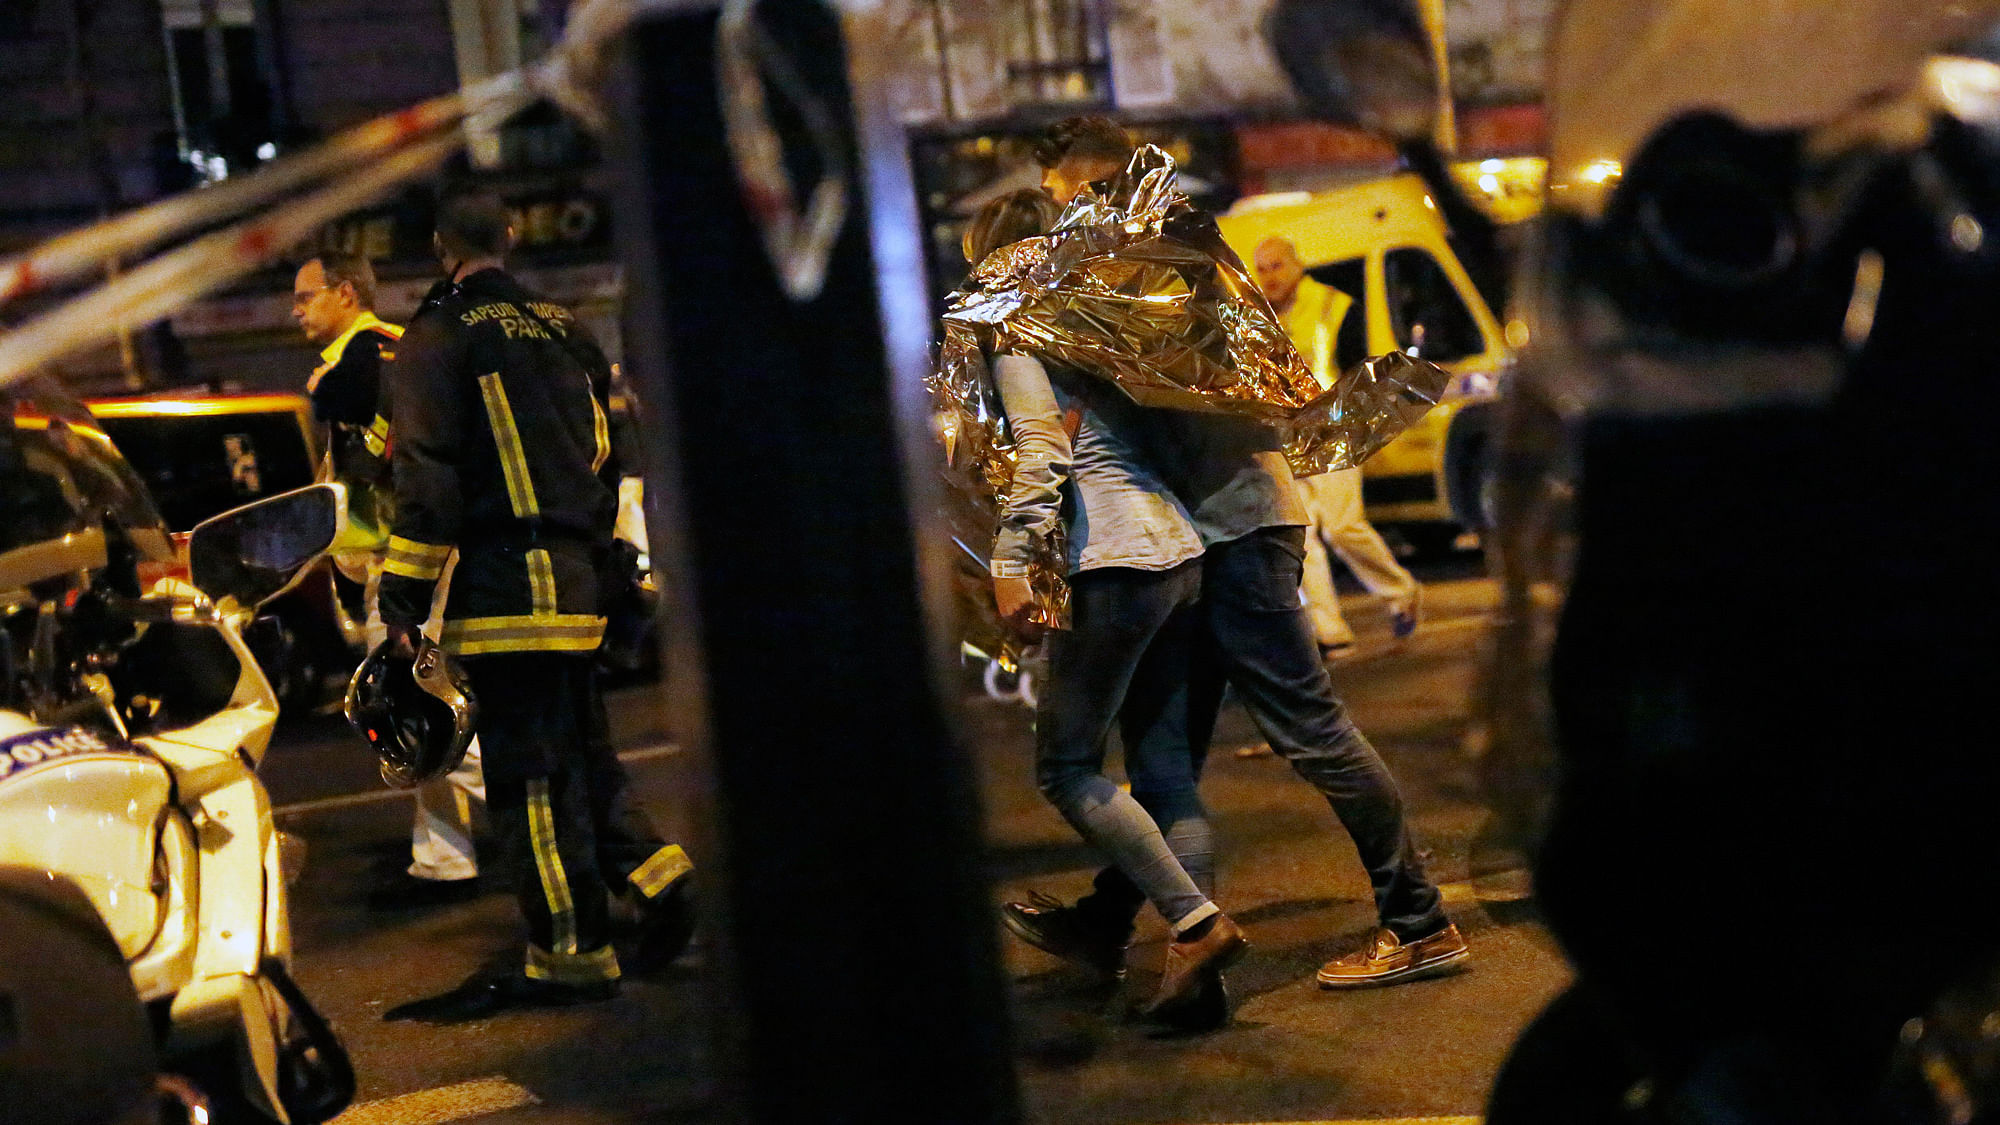 The terror attacks in Paris in November claimed over 130 lives. (Courtesy: AP)